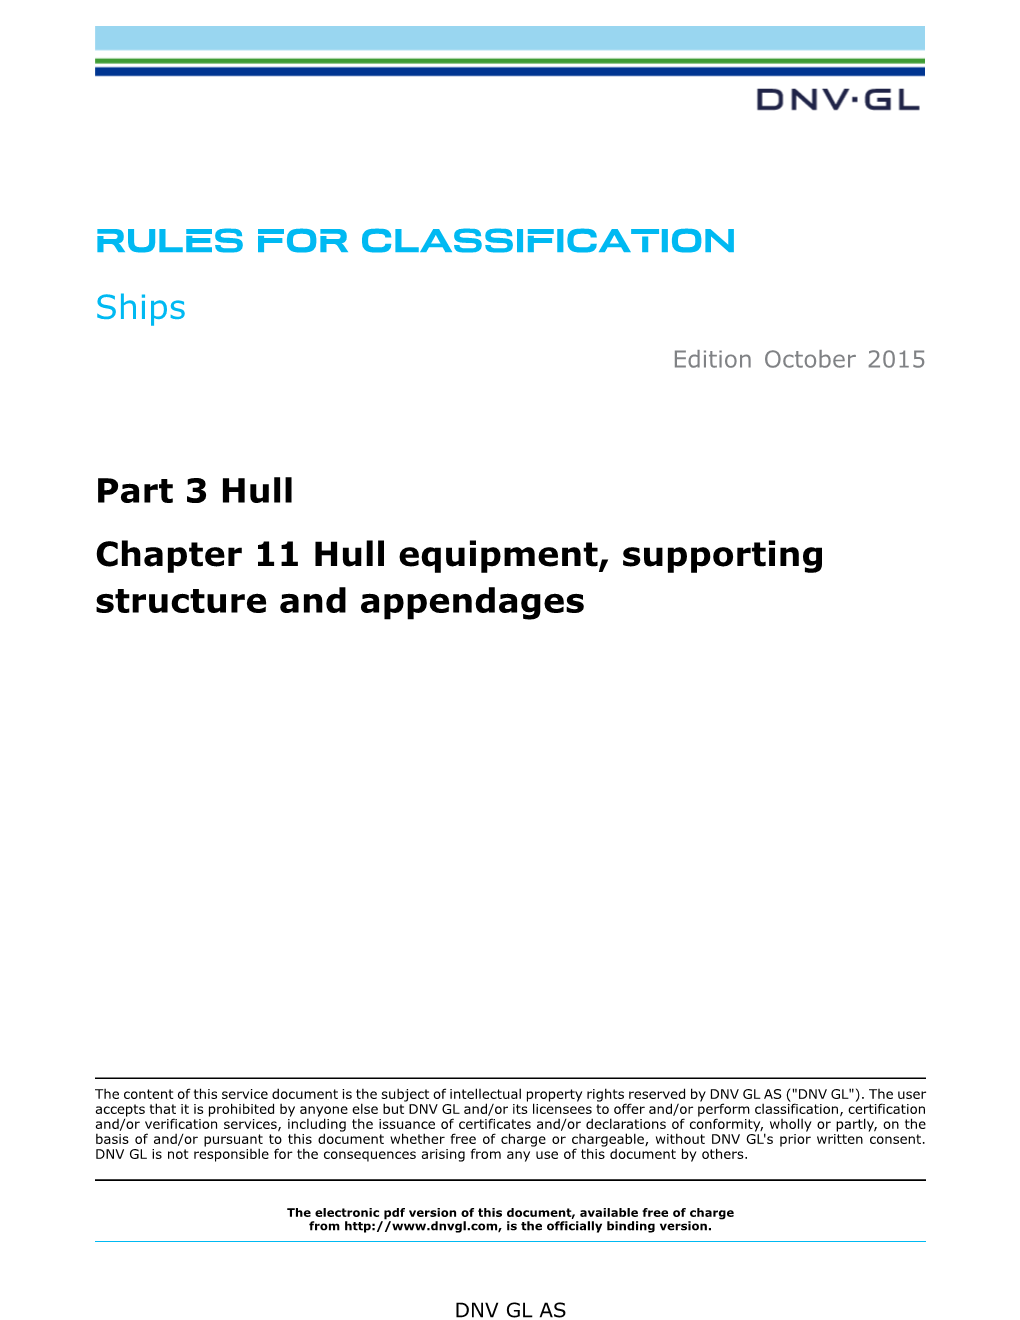 DNVGL-RU-SHIP-Pt3ch11 Hull Equipment, Supporting Structure